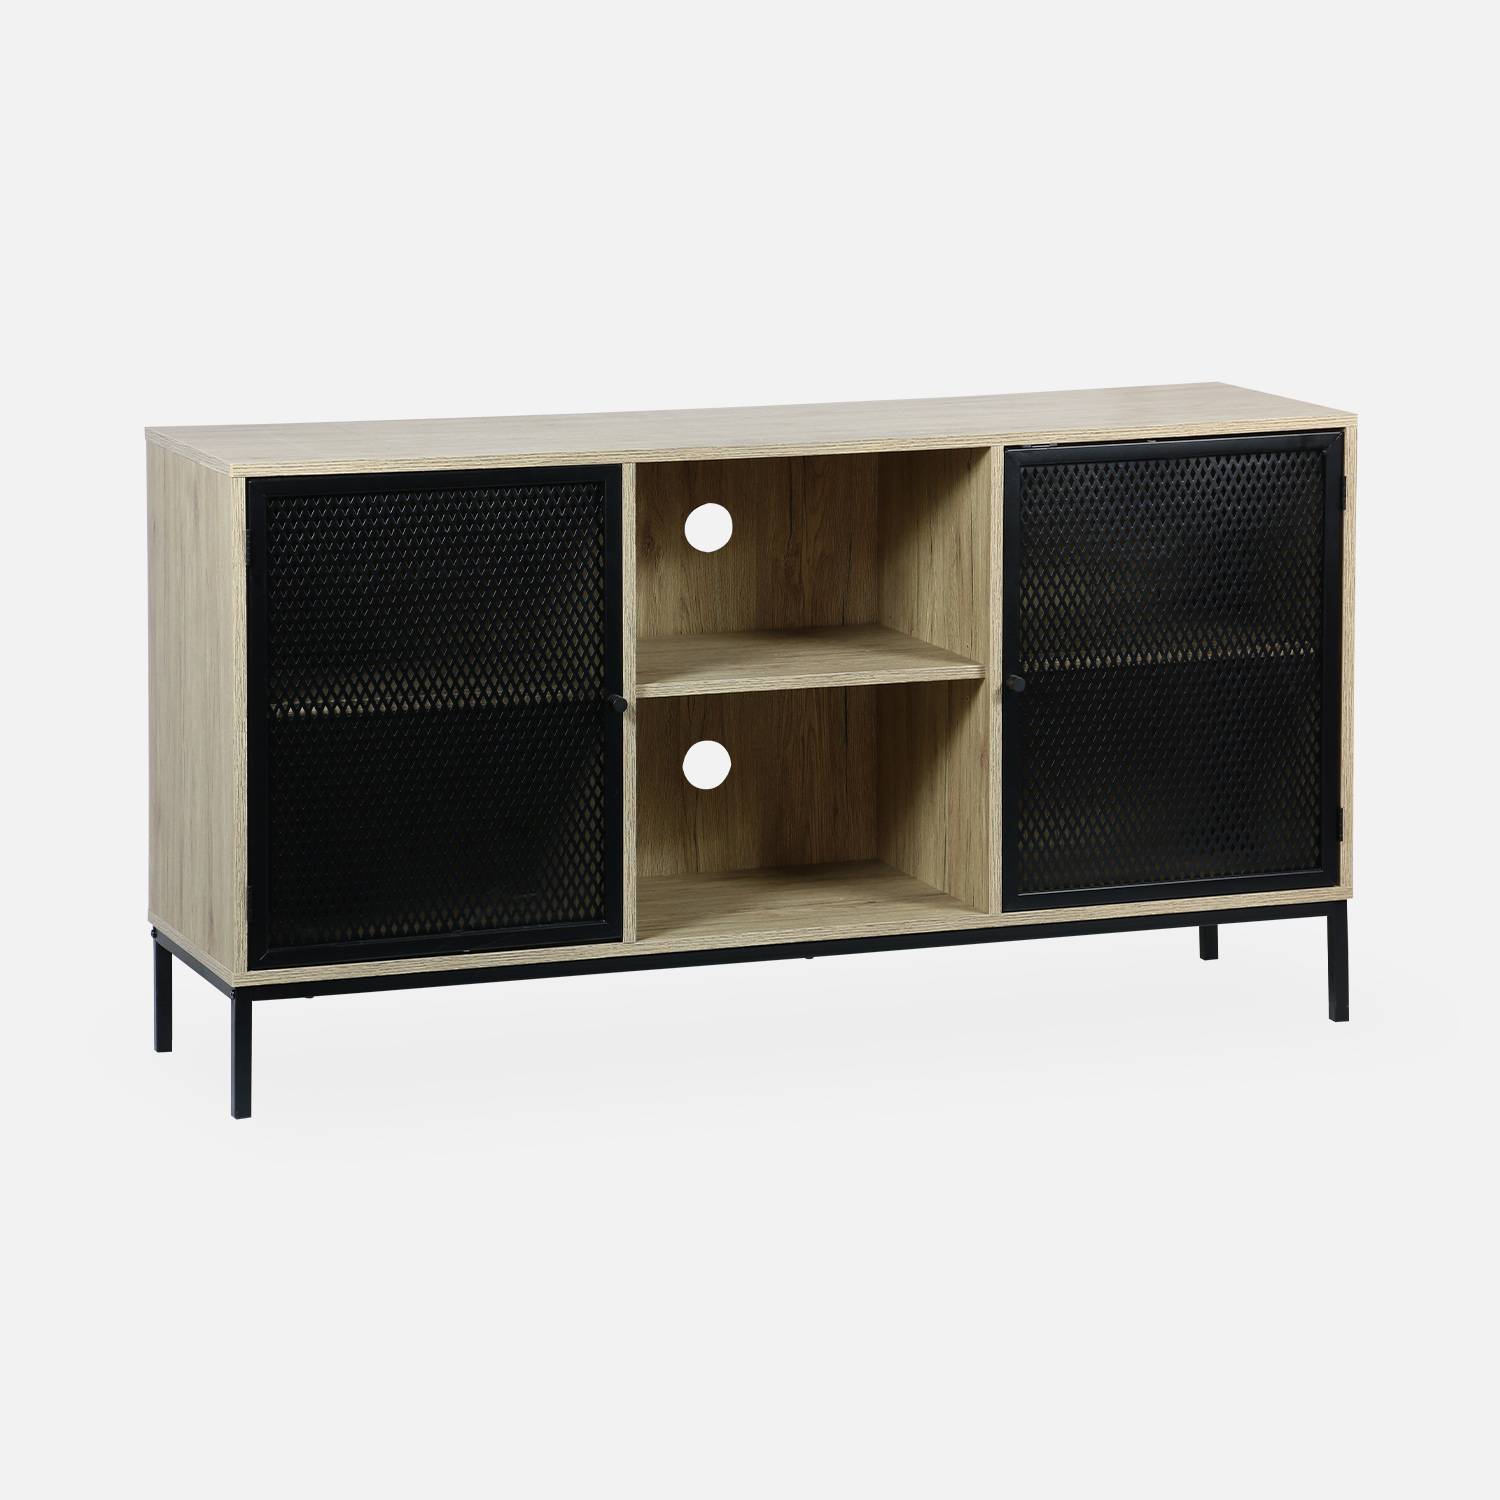 TV stand - metal and wood-effect - 2 doors and 6 compartments - Brooklyn,sweeek,Photo3